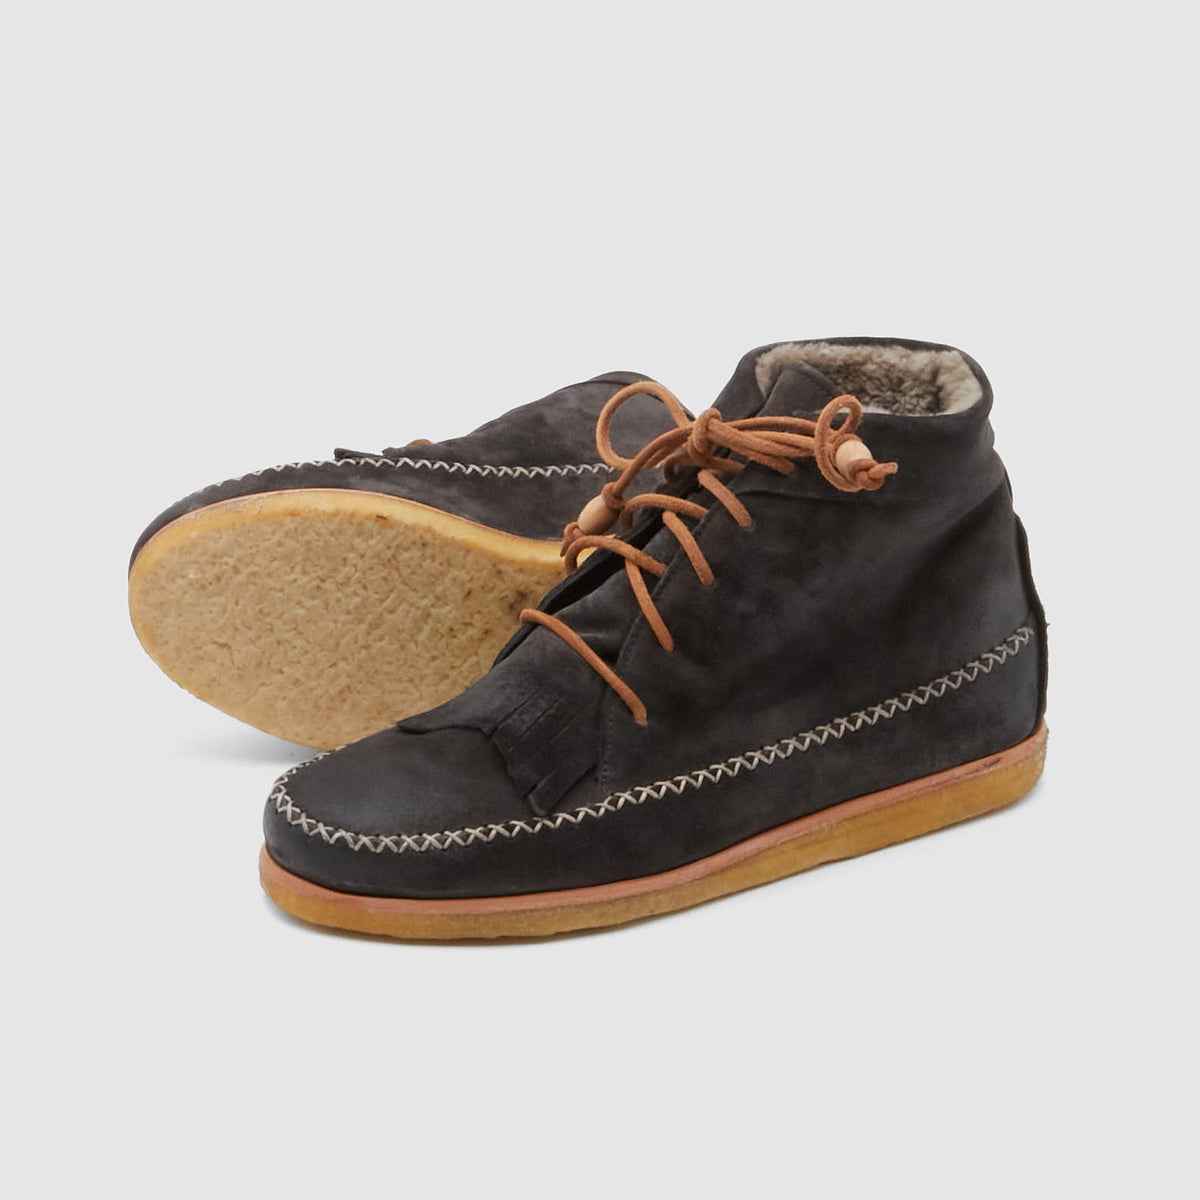 n.d.c. made by hand Softy Shearling Moccasin Boot